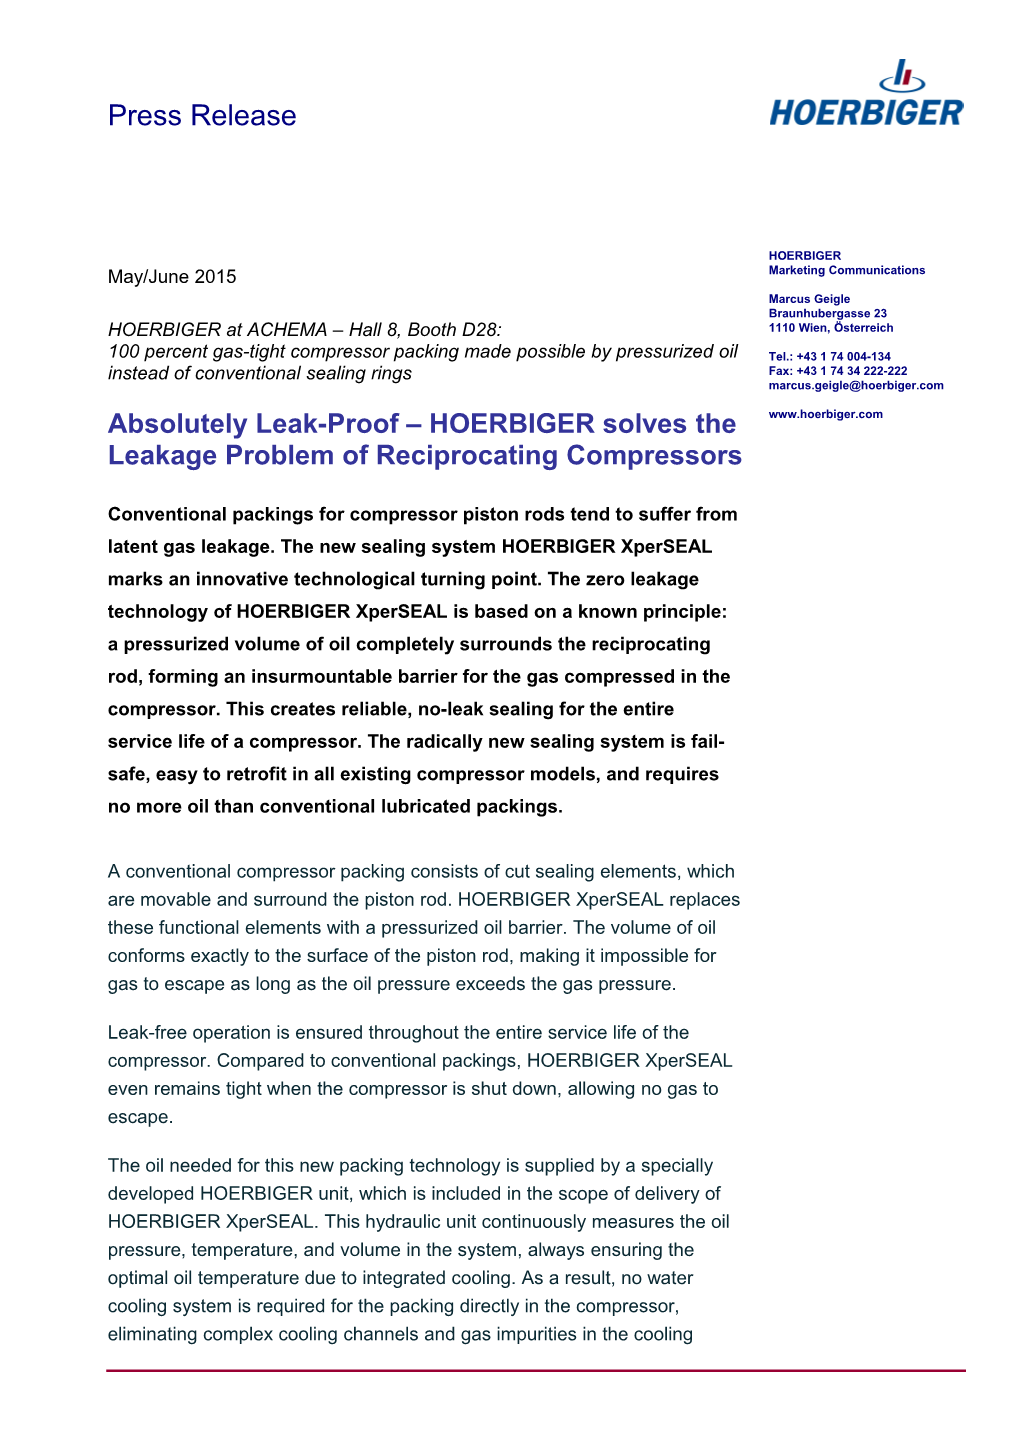 Absolutely Leak-Proof HOERBIGER Solves the Leakage Problem of Reciprocating Compressors